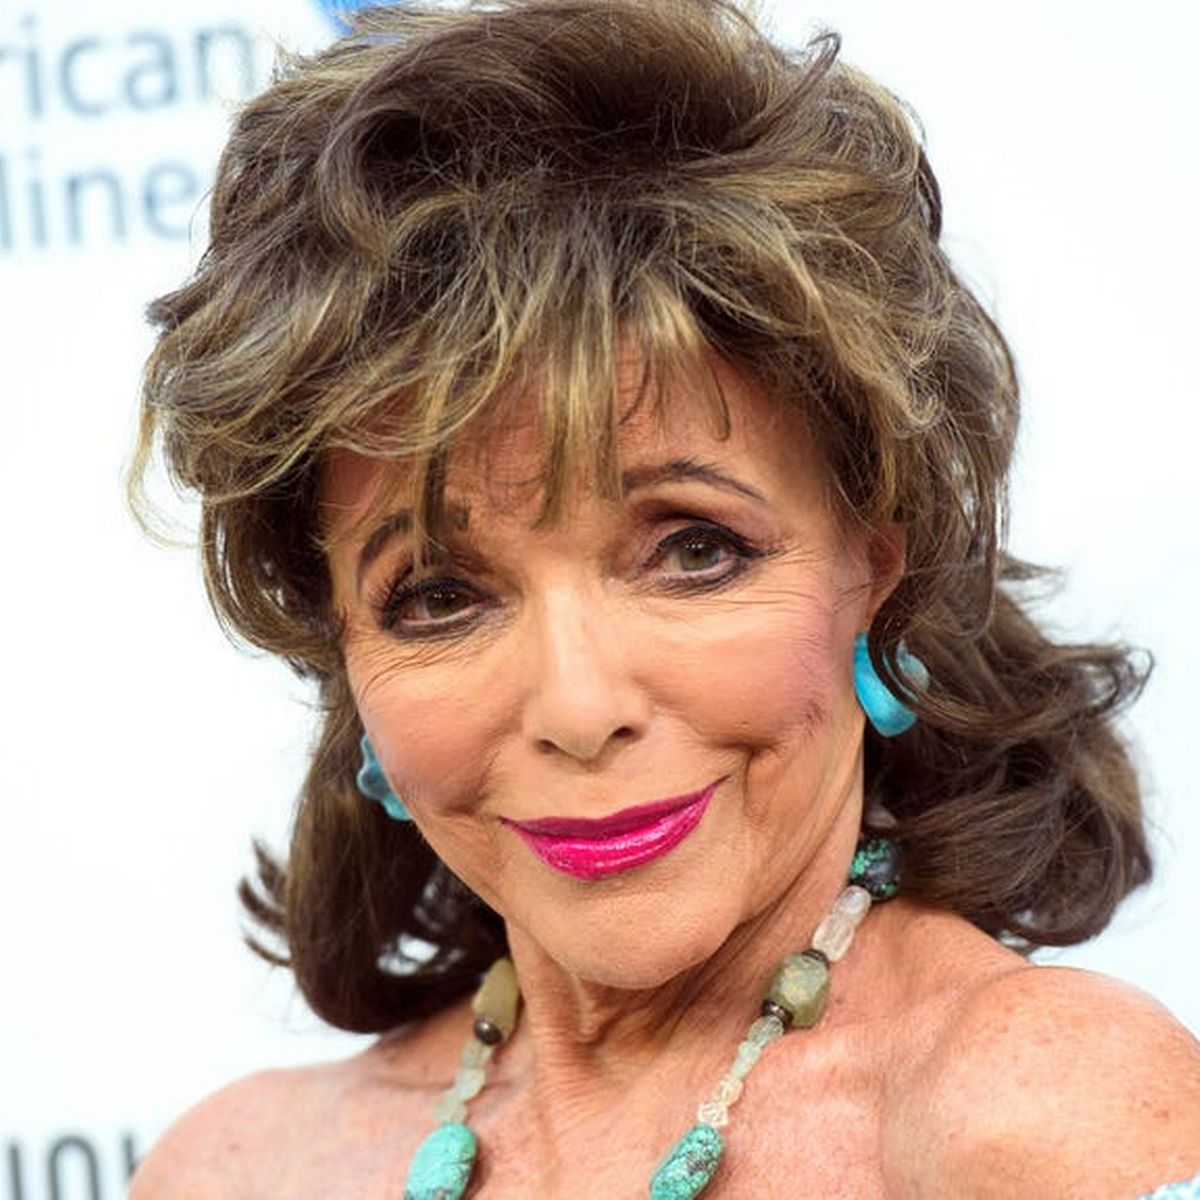 How Rich is Joan Collins